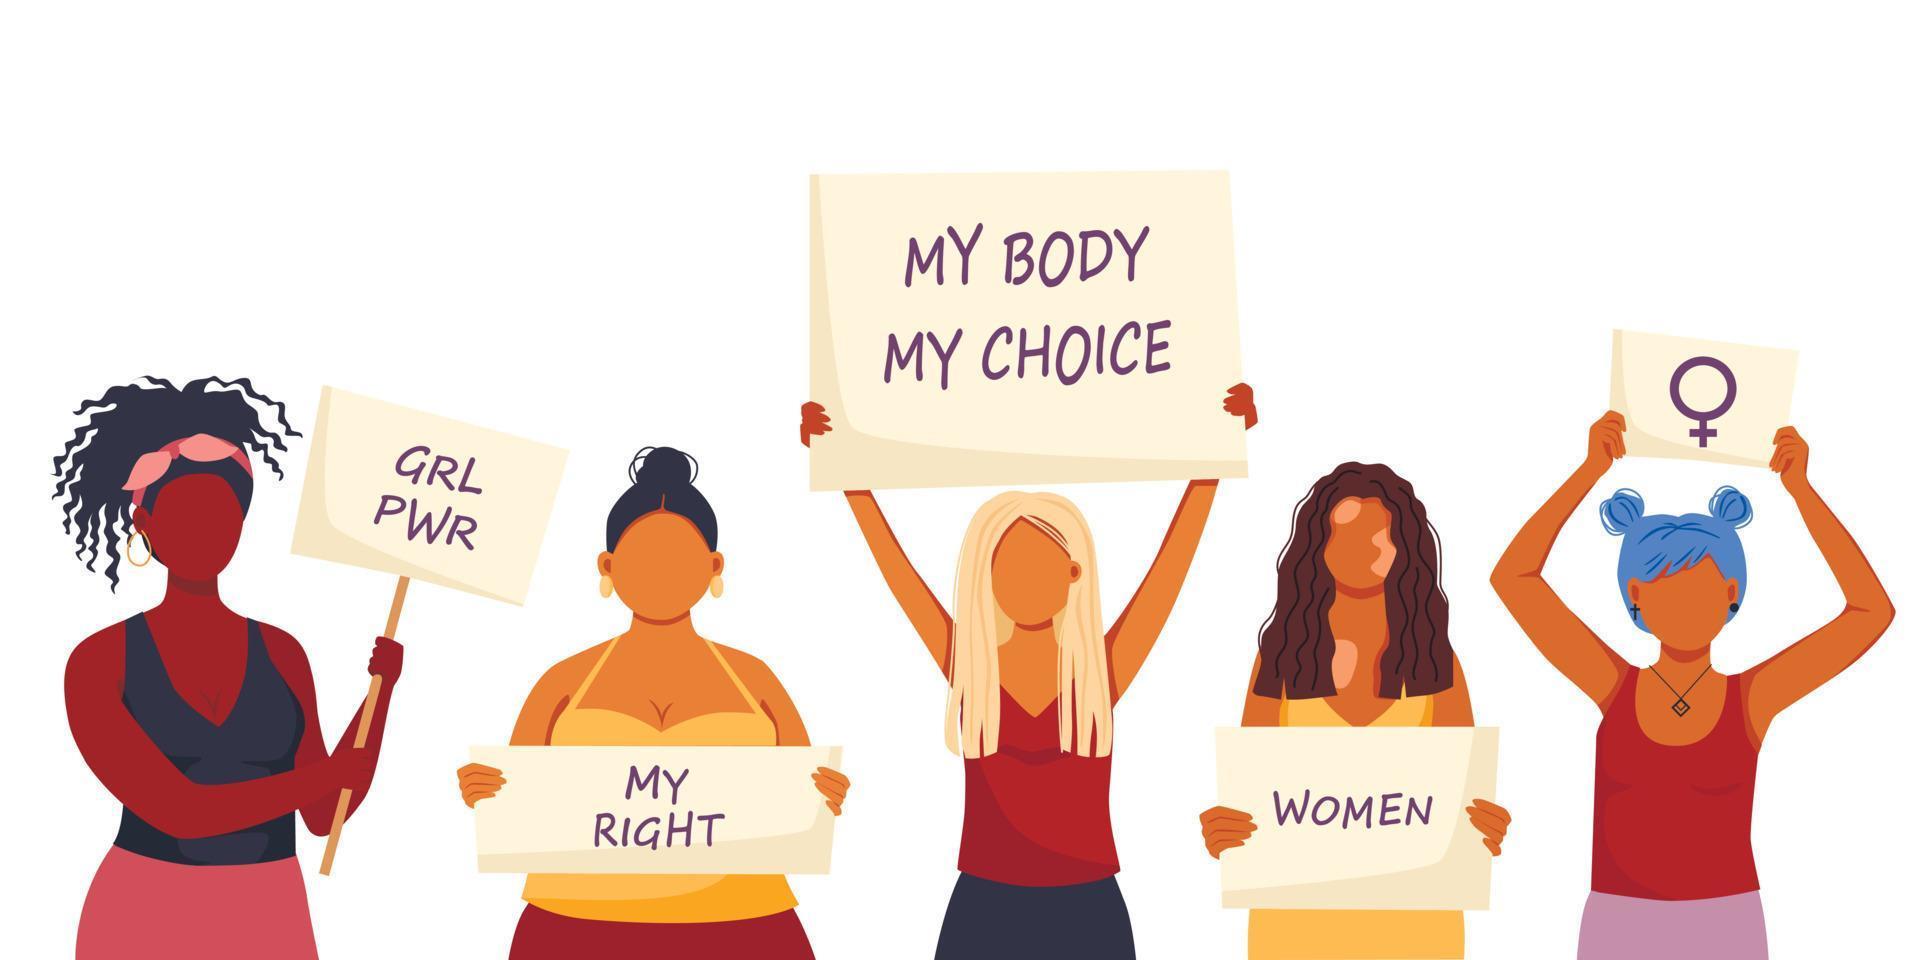 Vector illustration of women holding signs or placard on a protest demostration or picket. Woman against violence, pollution, descrimination, human rights violation.